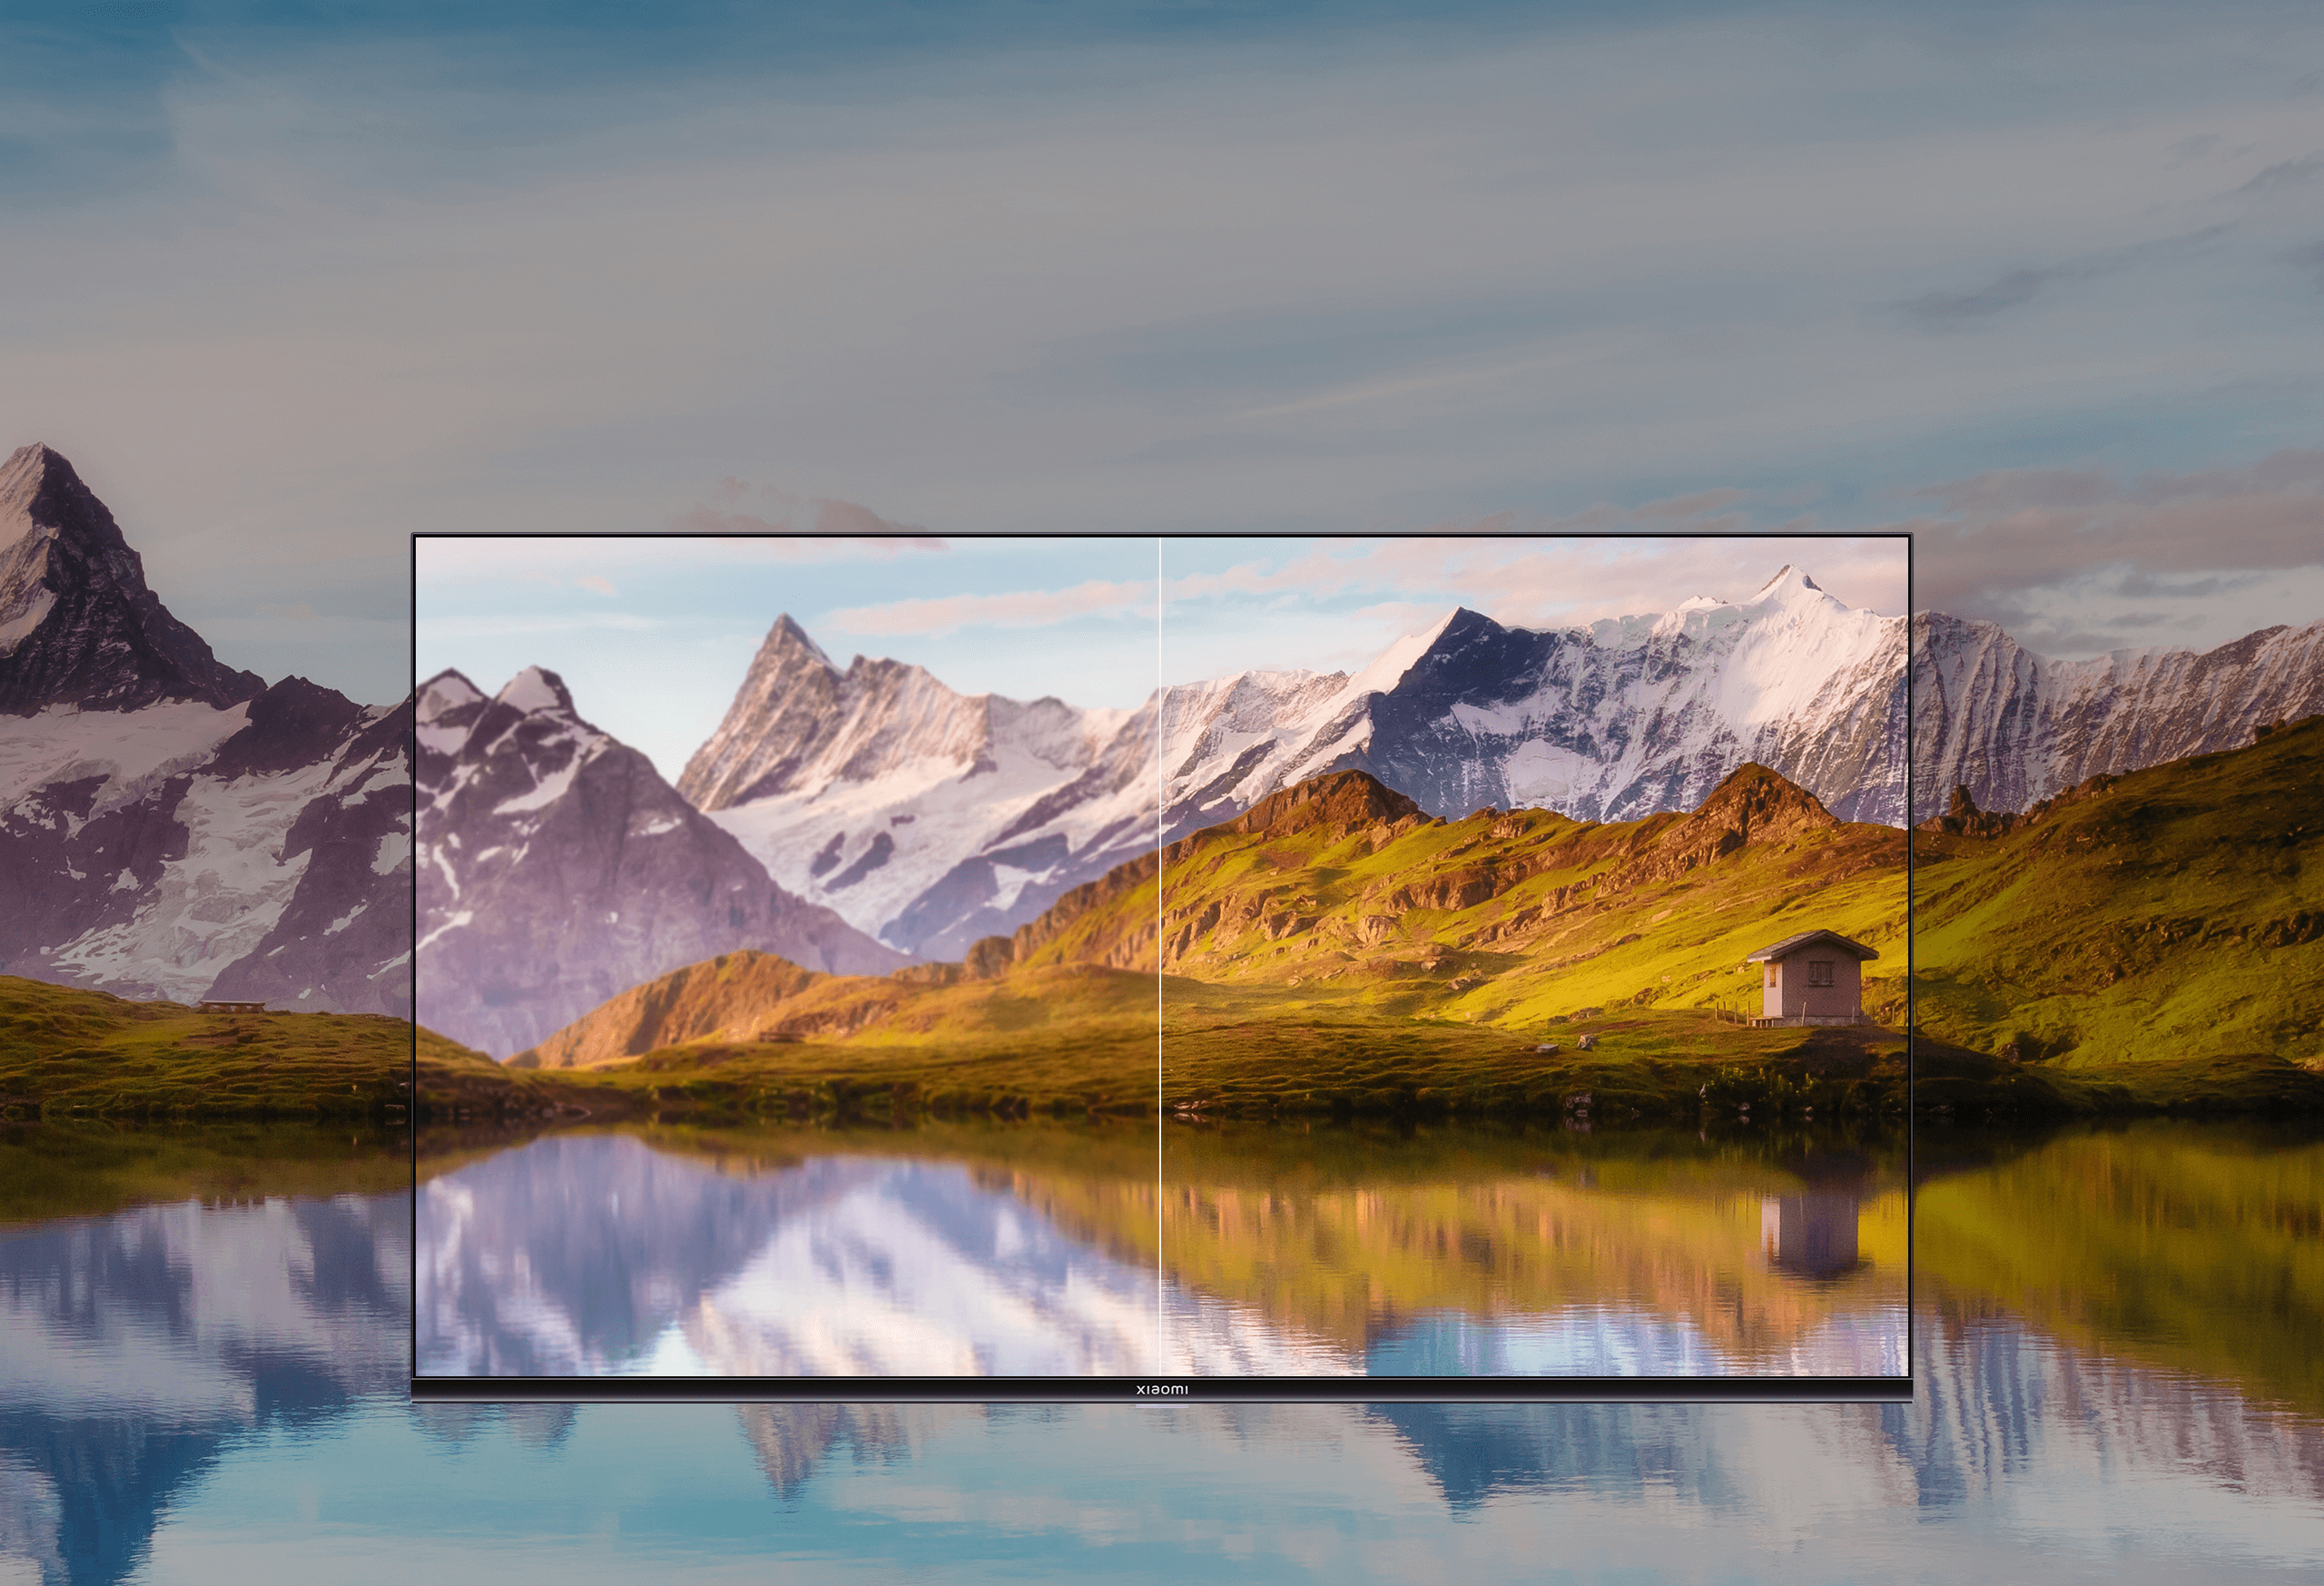 Xiaomi TV 43" A2 Smart life Premium 4K Ultra HD display with MEMC. Dolby Vision support Dolby Audio and DTS-HD support with Smart TV powered by Android TV and Google assintant built-in.